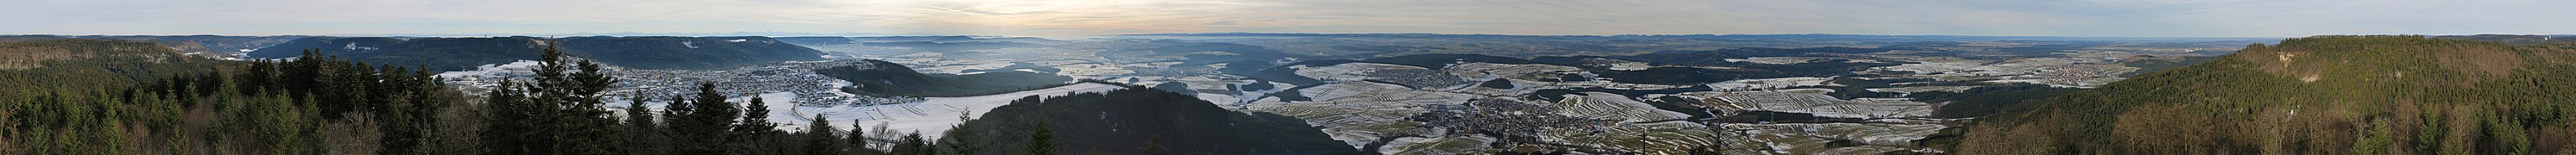 Panoramic view (360°) from the Lemberg tower with Alps and Black forest